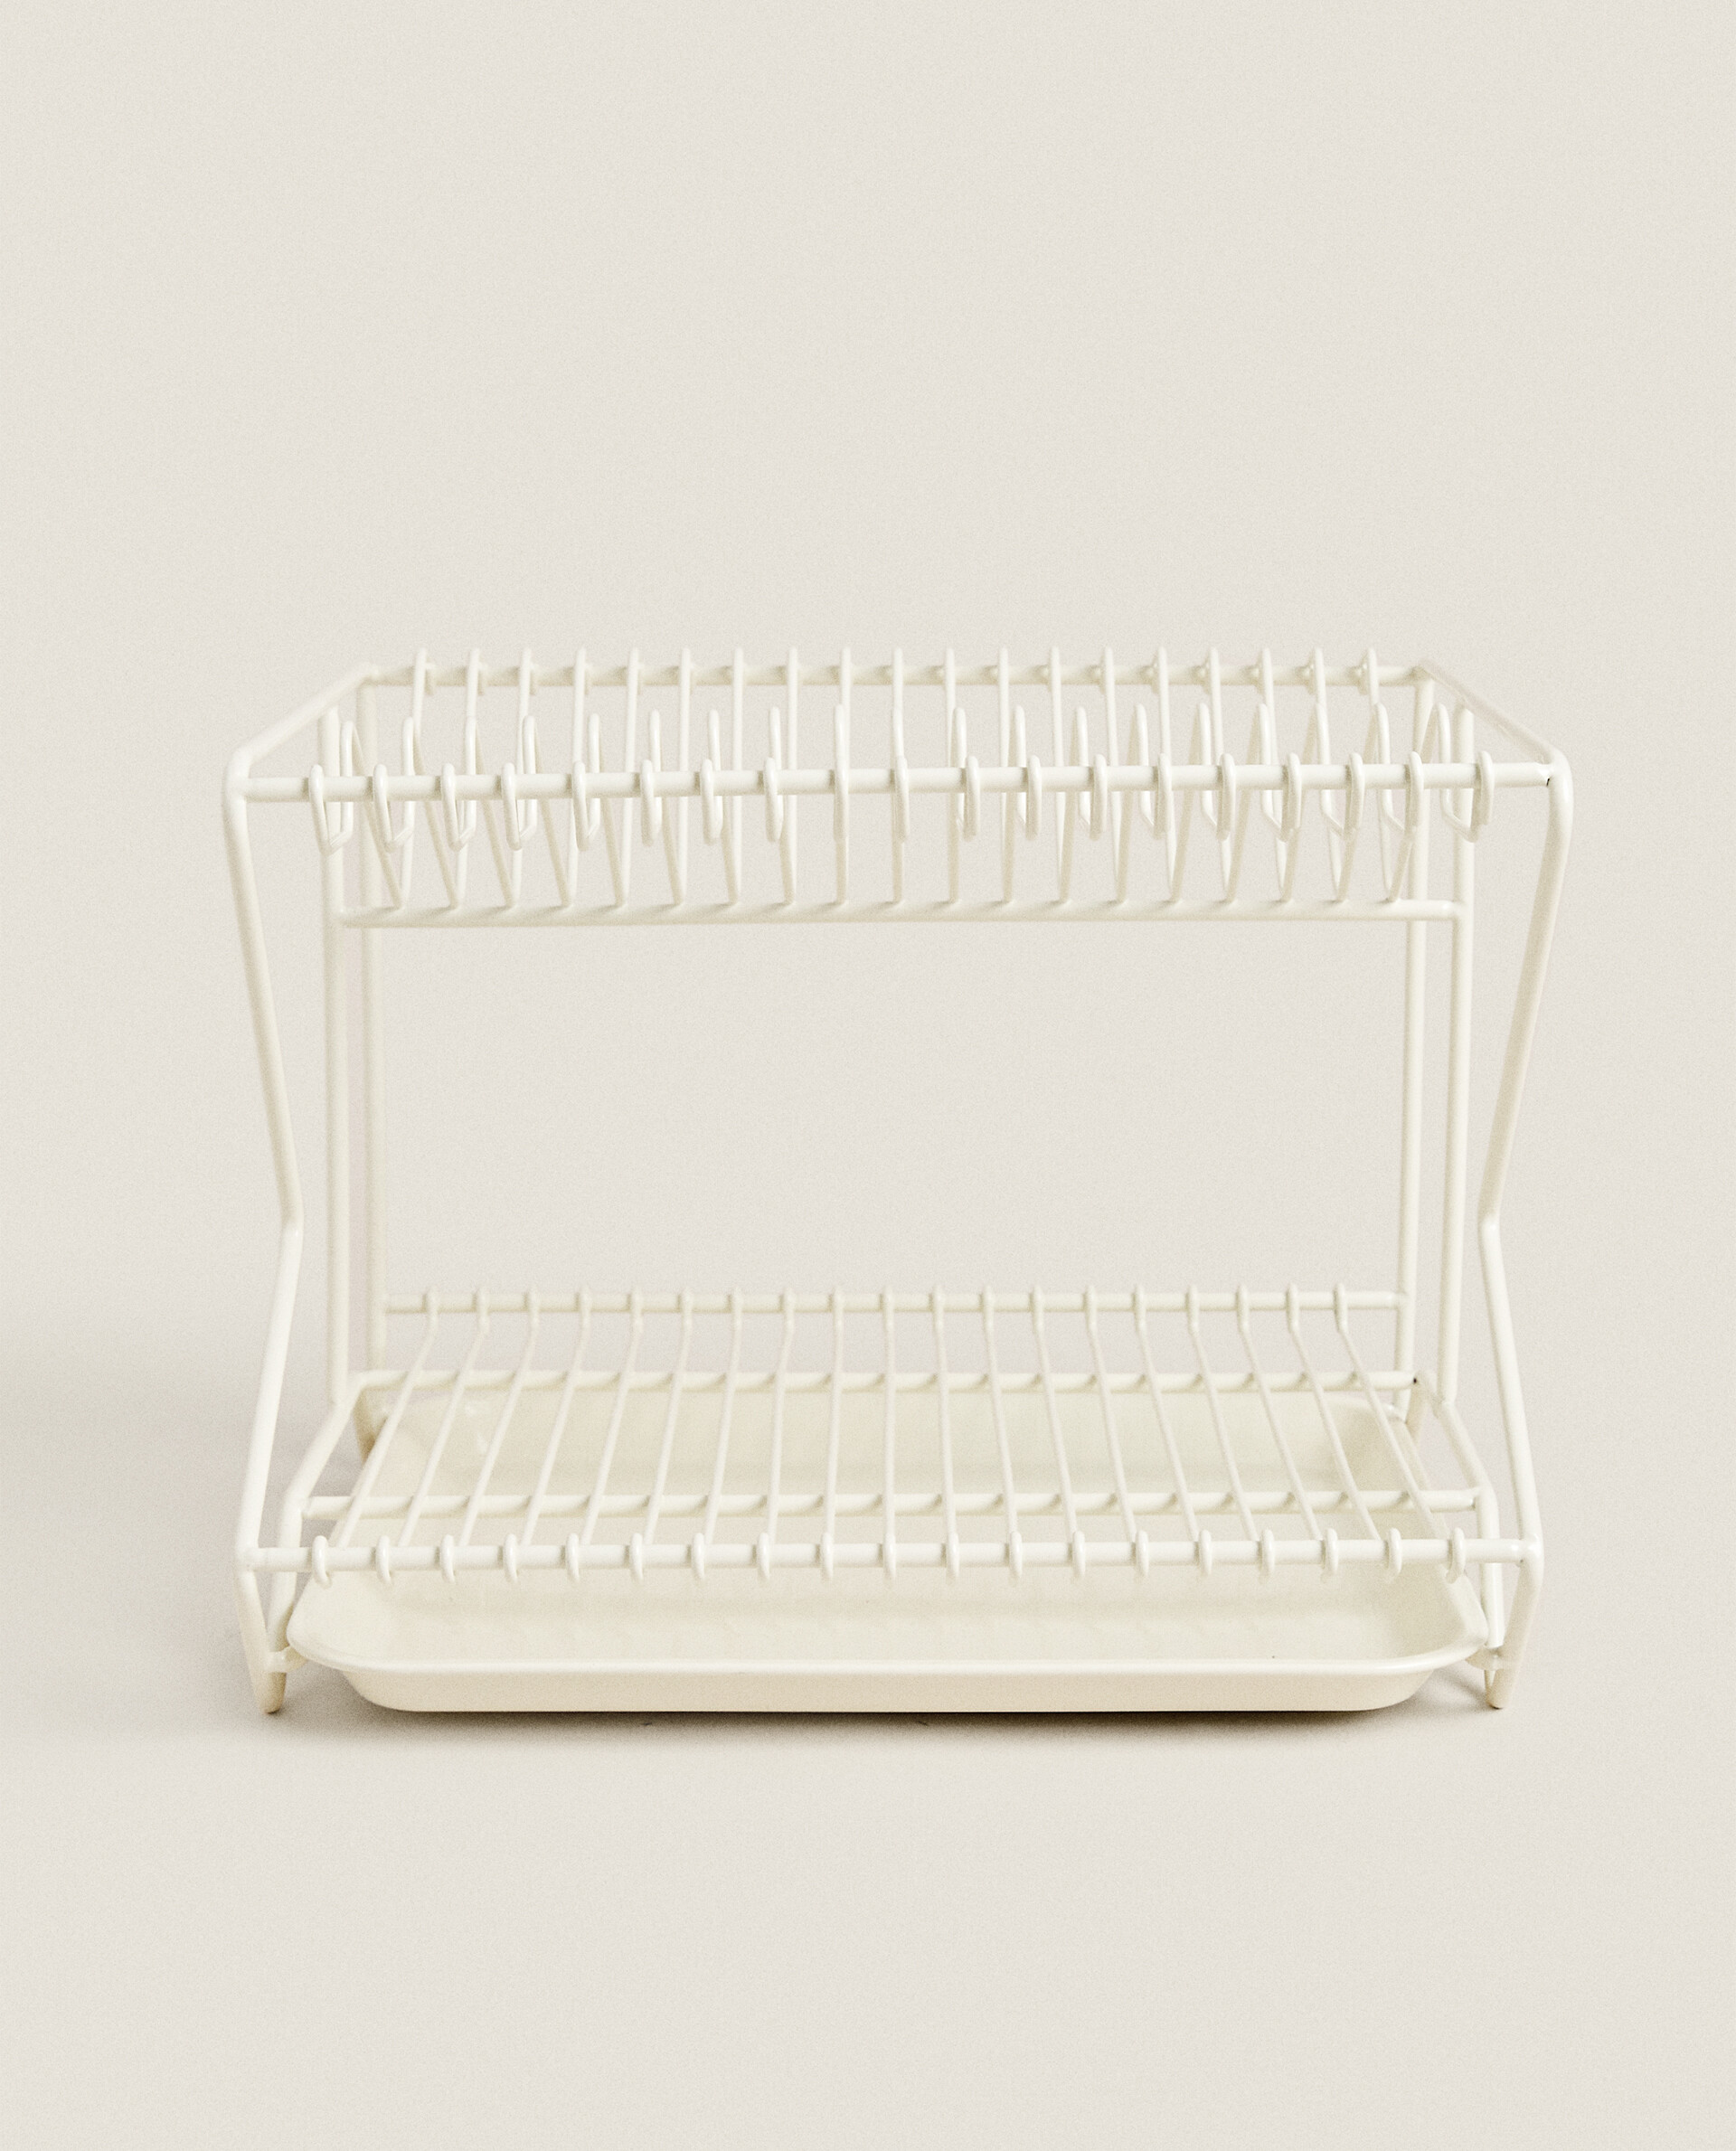 METAL DISH RACK WITH TRAY  Zara Home United States of America